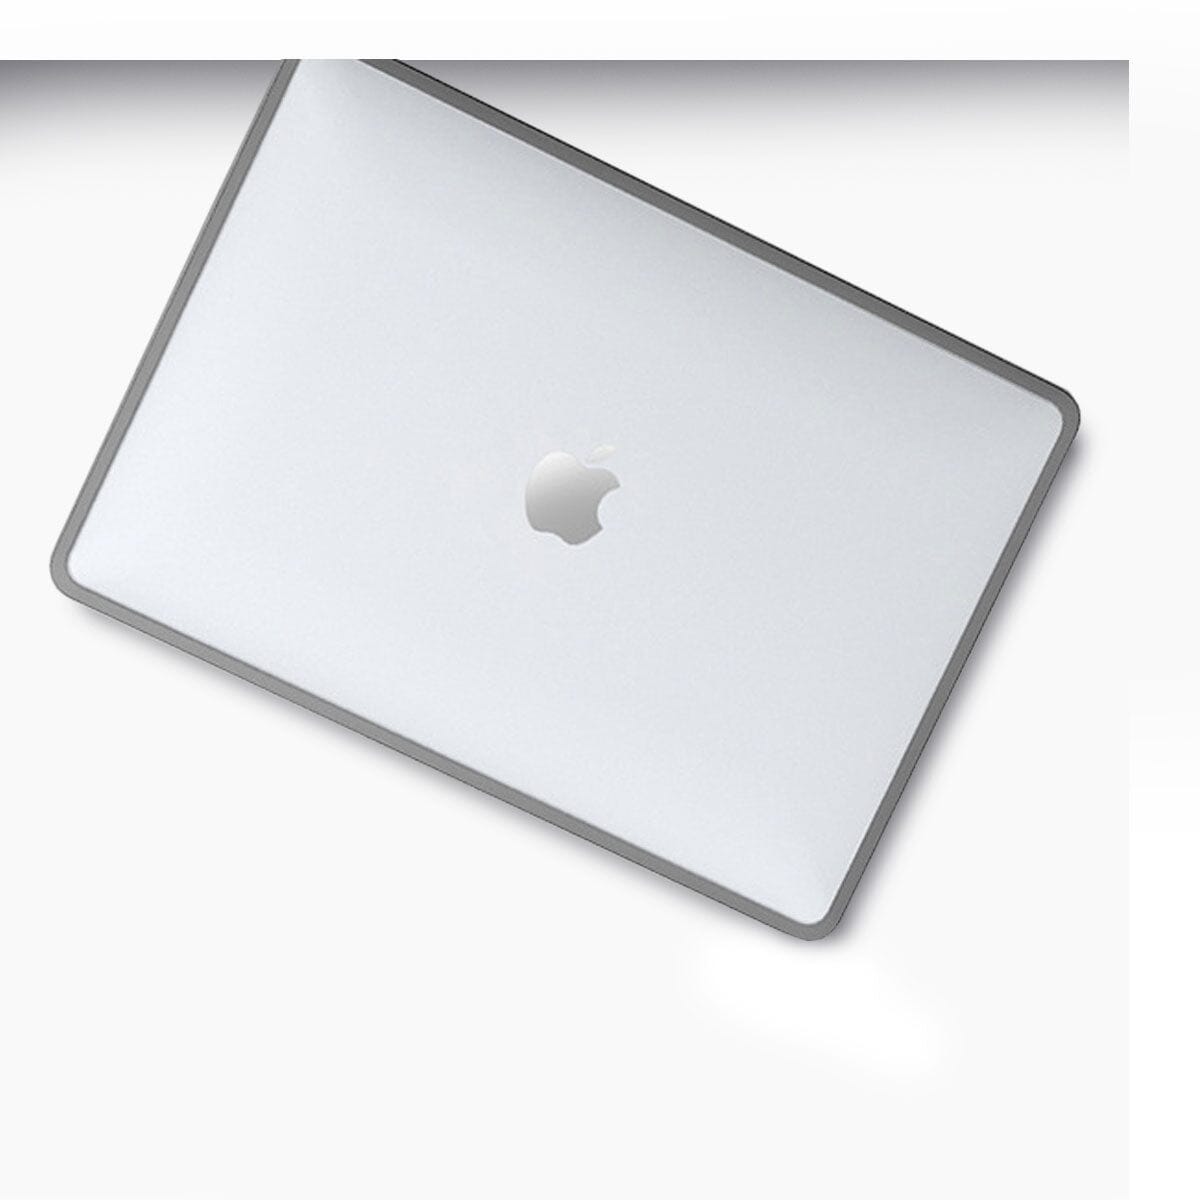 See this MacBook Cover - Hard Shell Cases with Soft Bumpers!